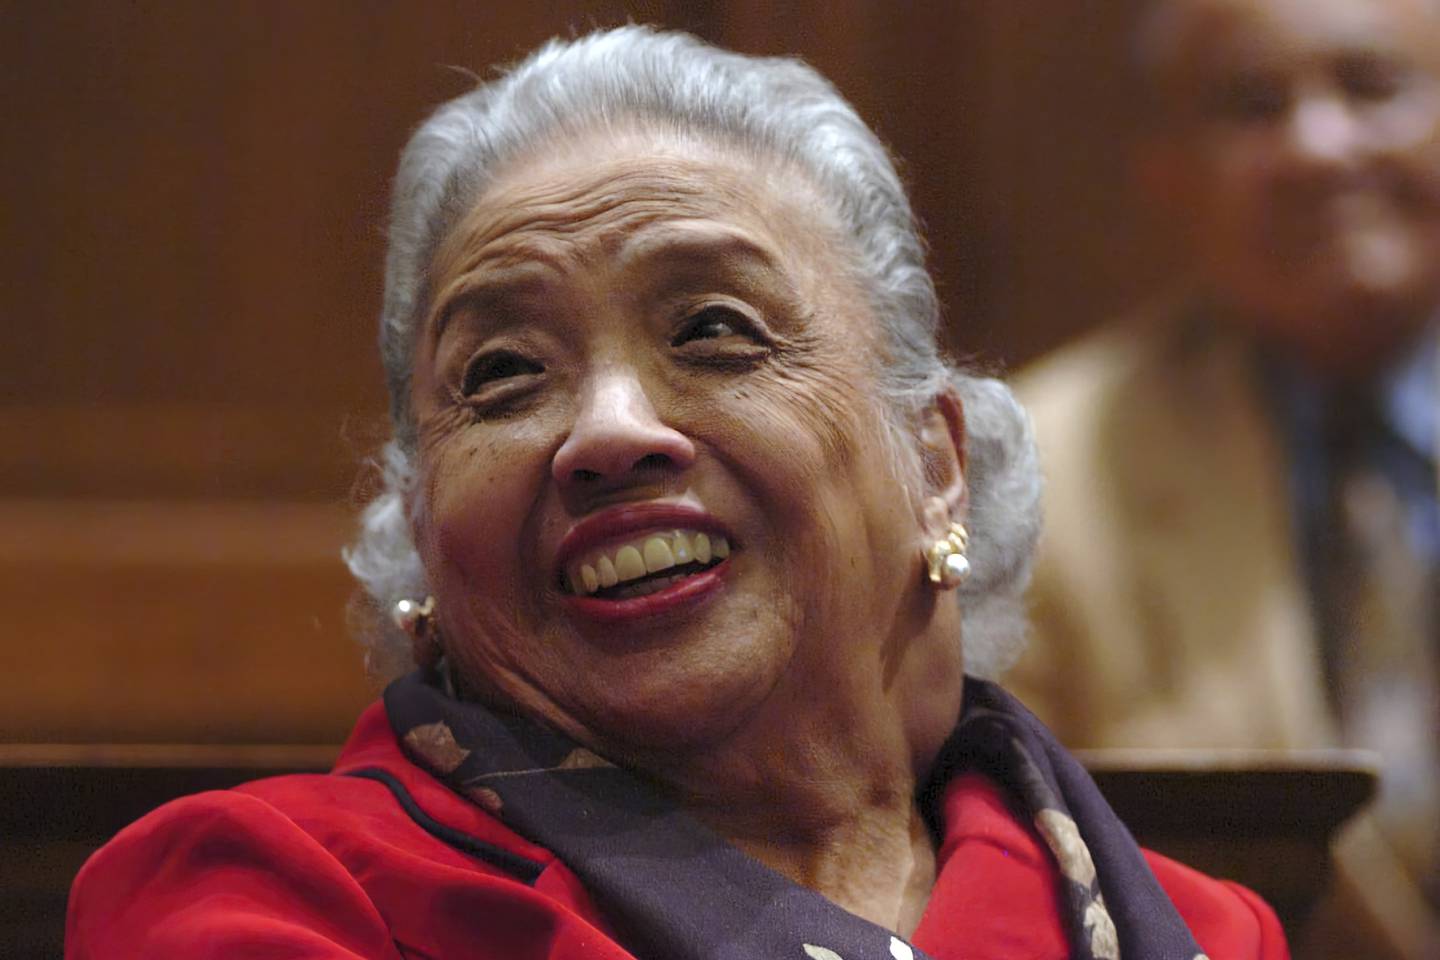 FILE - Cecilia Marshall, widow of Supreme Court Justice Thurgood Marshall, laughs while watching a slide show about her husband during a meeting to rally support for renaming Baltimore-Washington International Airport after Thurgood Marshall, one of the state's most famous native sons and the first Black justice on the U.S. Supreme Court, in Annapolis, Md., March 28, 2005. The Supreme Court says Cecilia "Cissy" Marshall has died. She was 94.